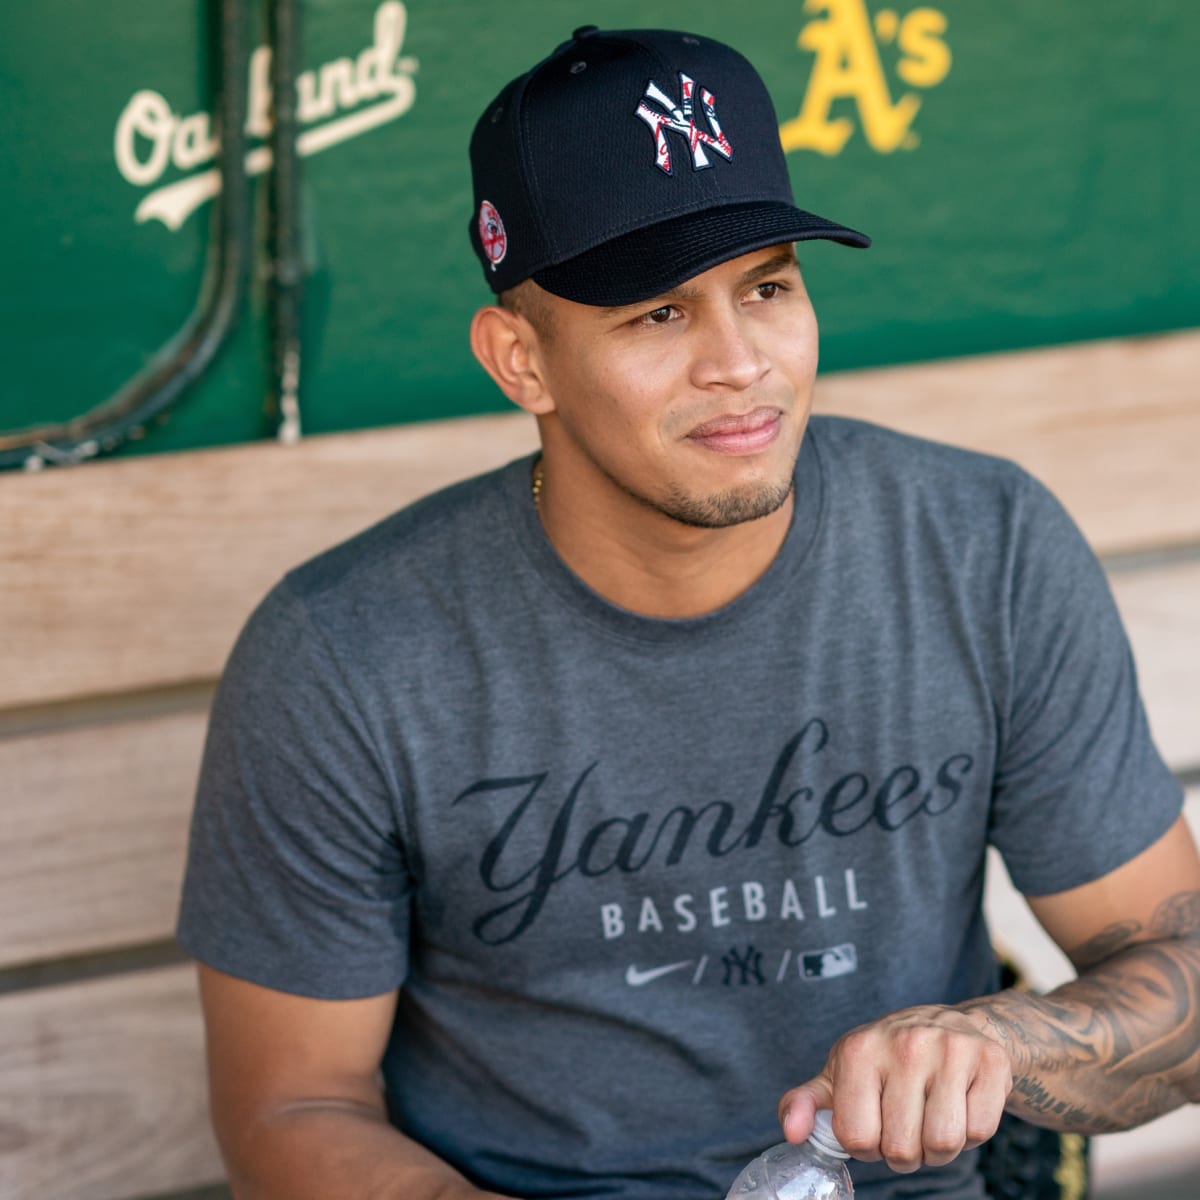 Jonathan Loaisiga's quietly dominant start to 2021 for the Yankees